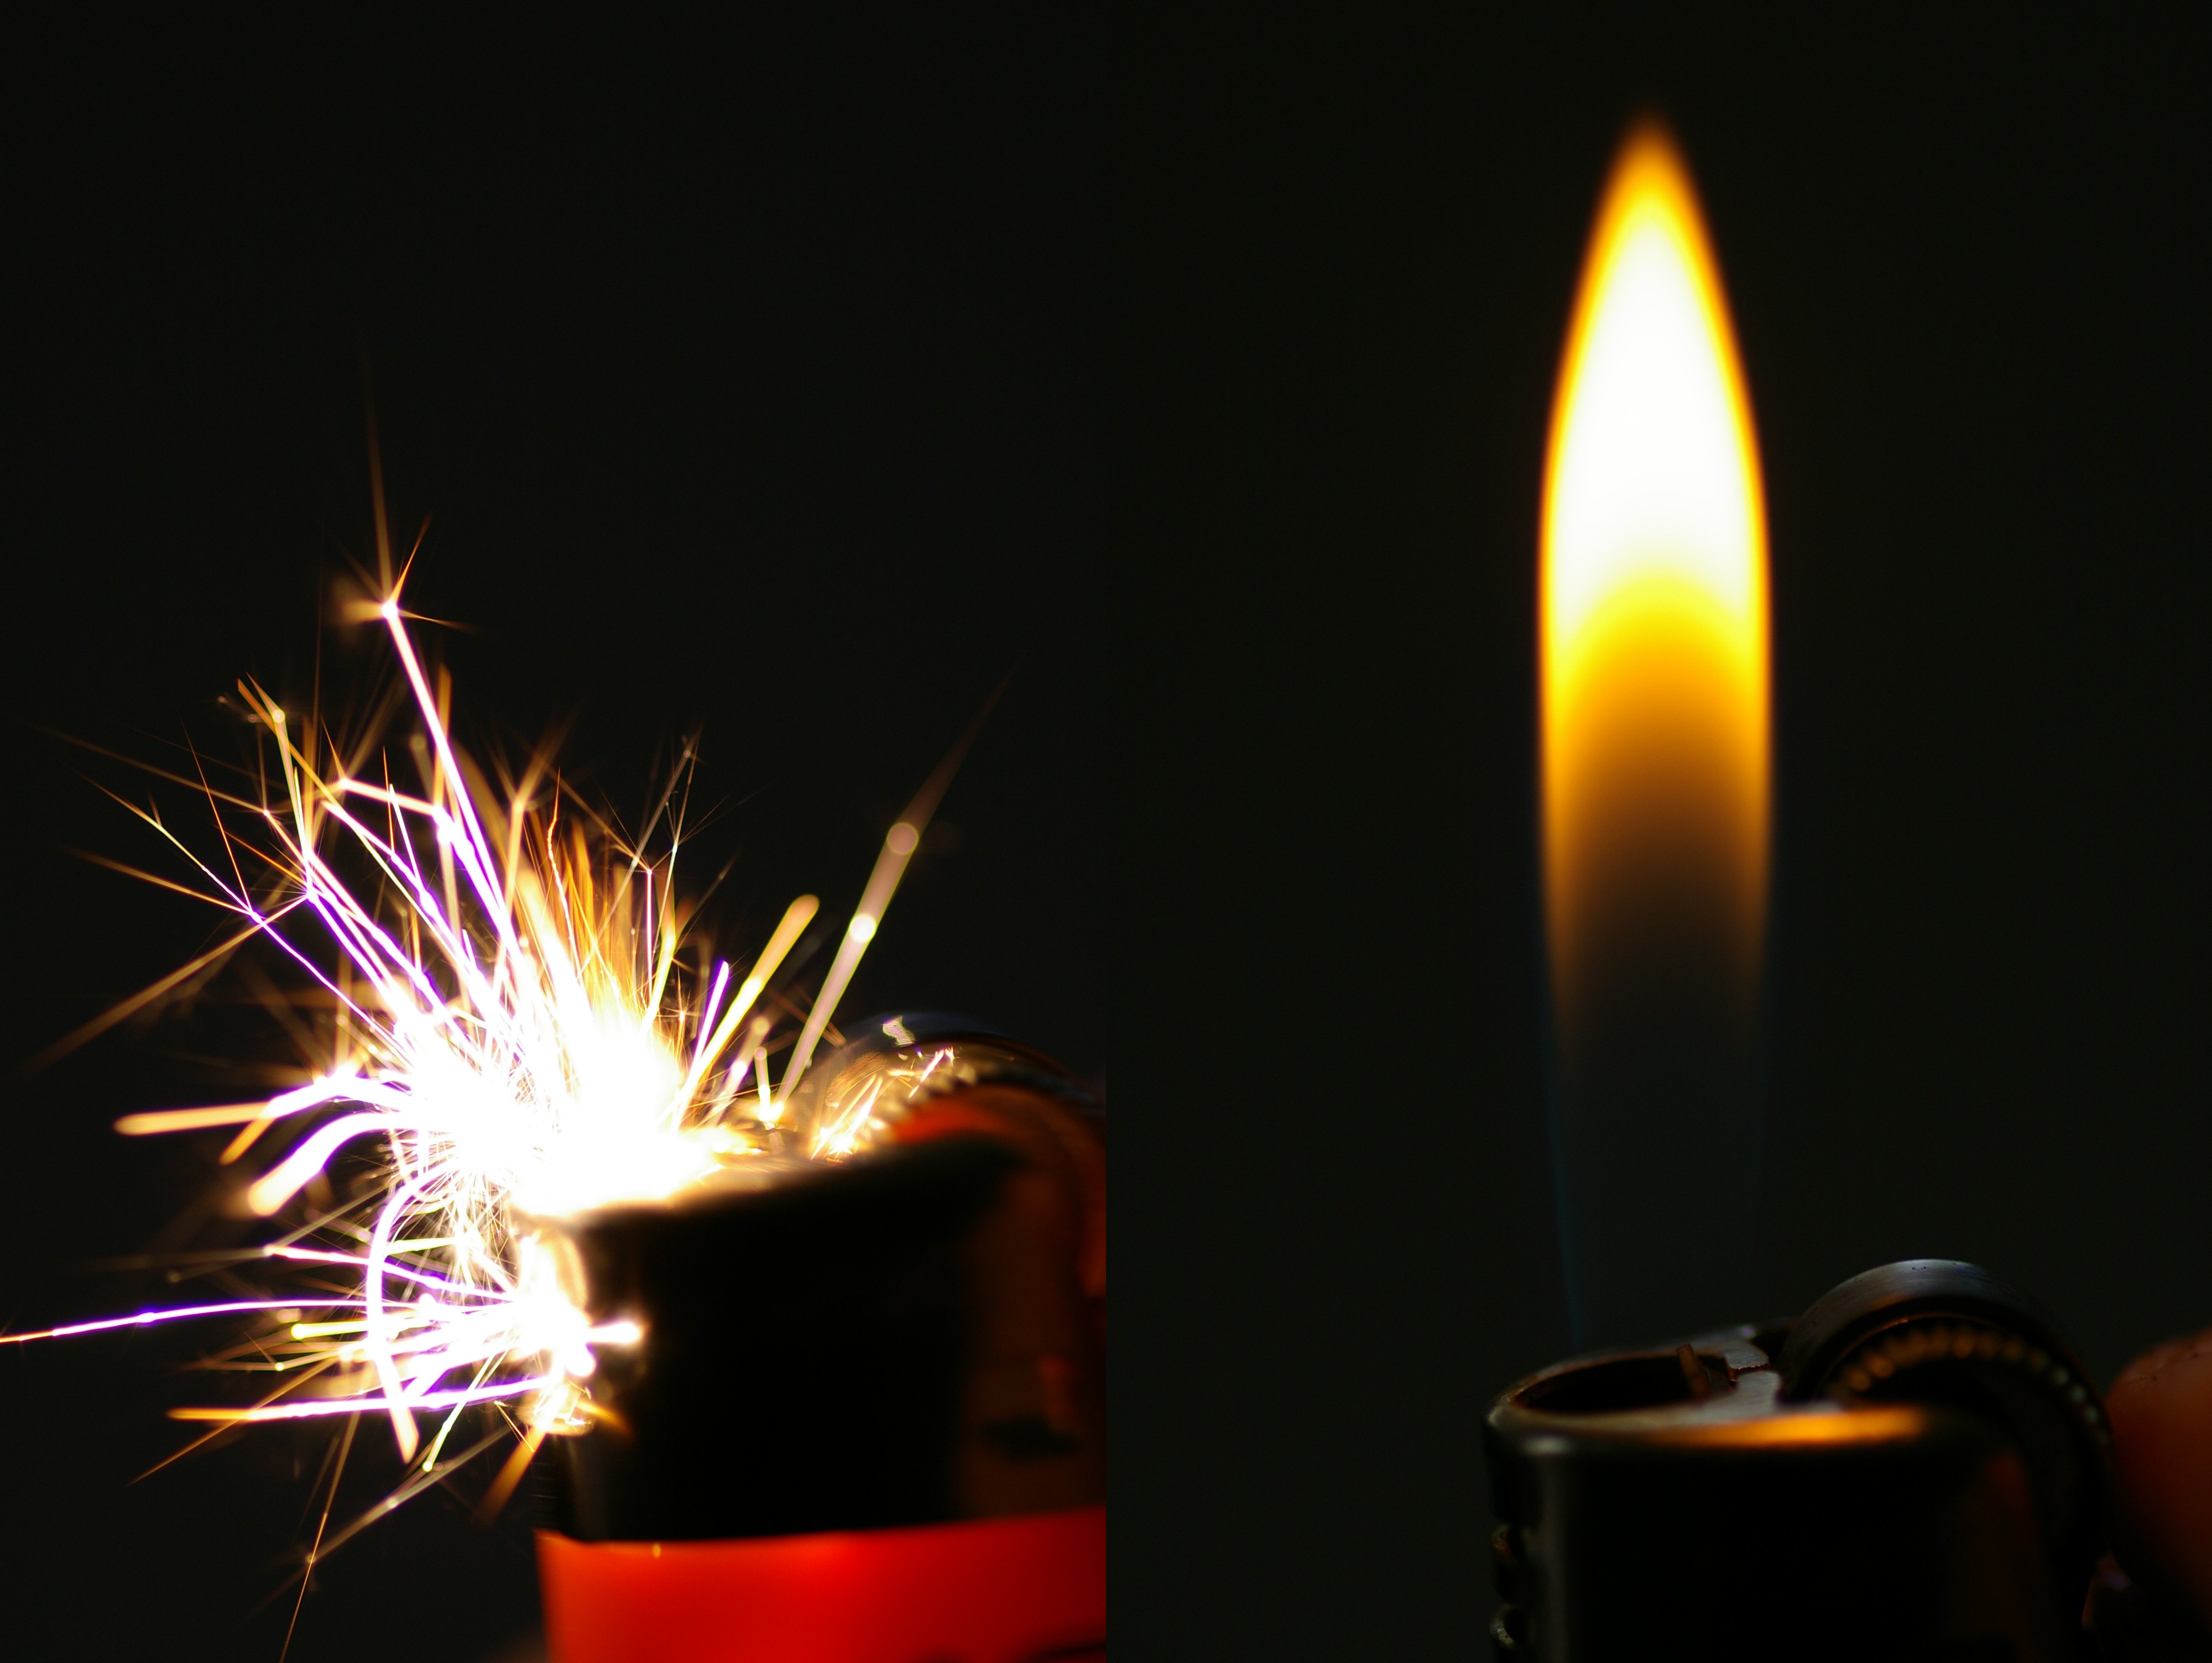 File:Lighter sparks and flame.jpg - Wikimedia Commons